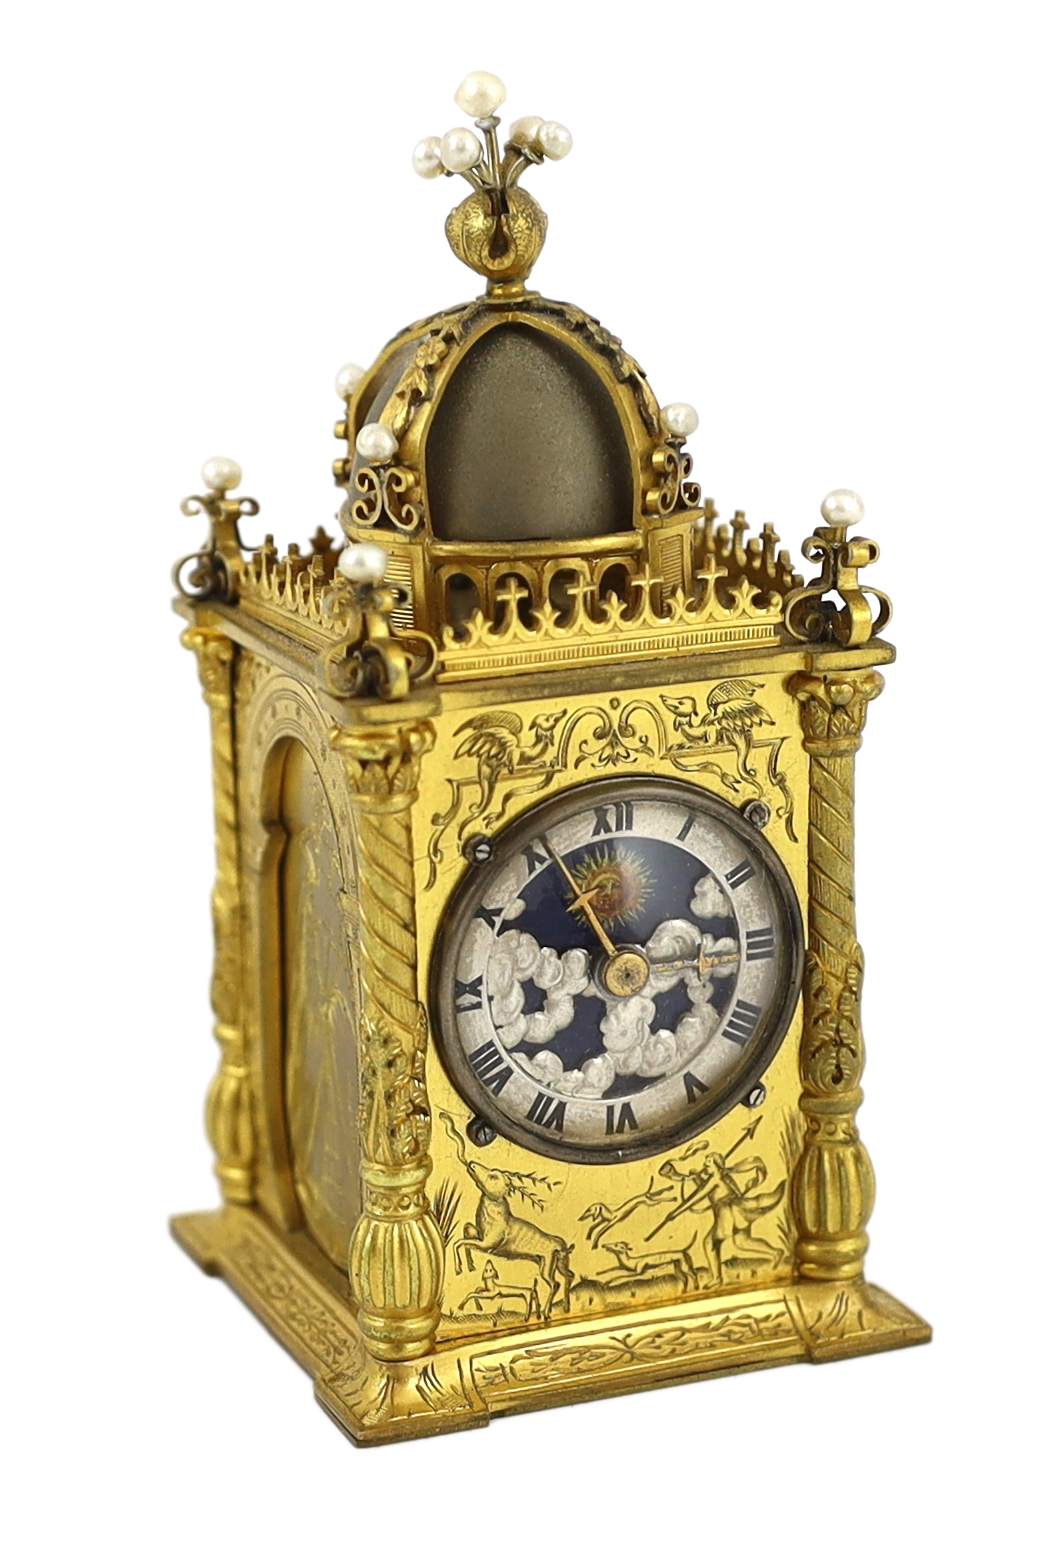 An early 20th century French miniature timepiece modelled on a 17th century domed bell clock, the